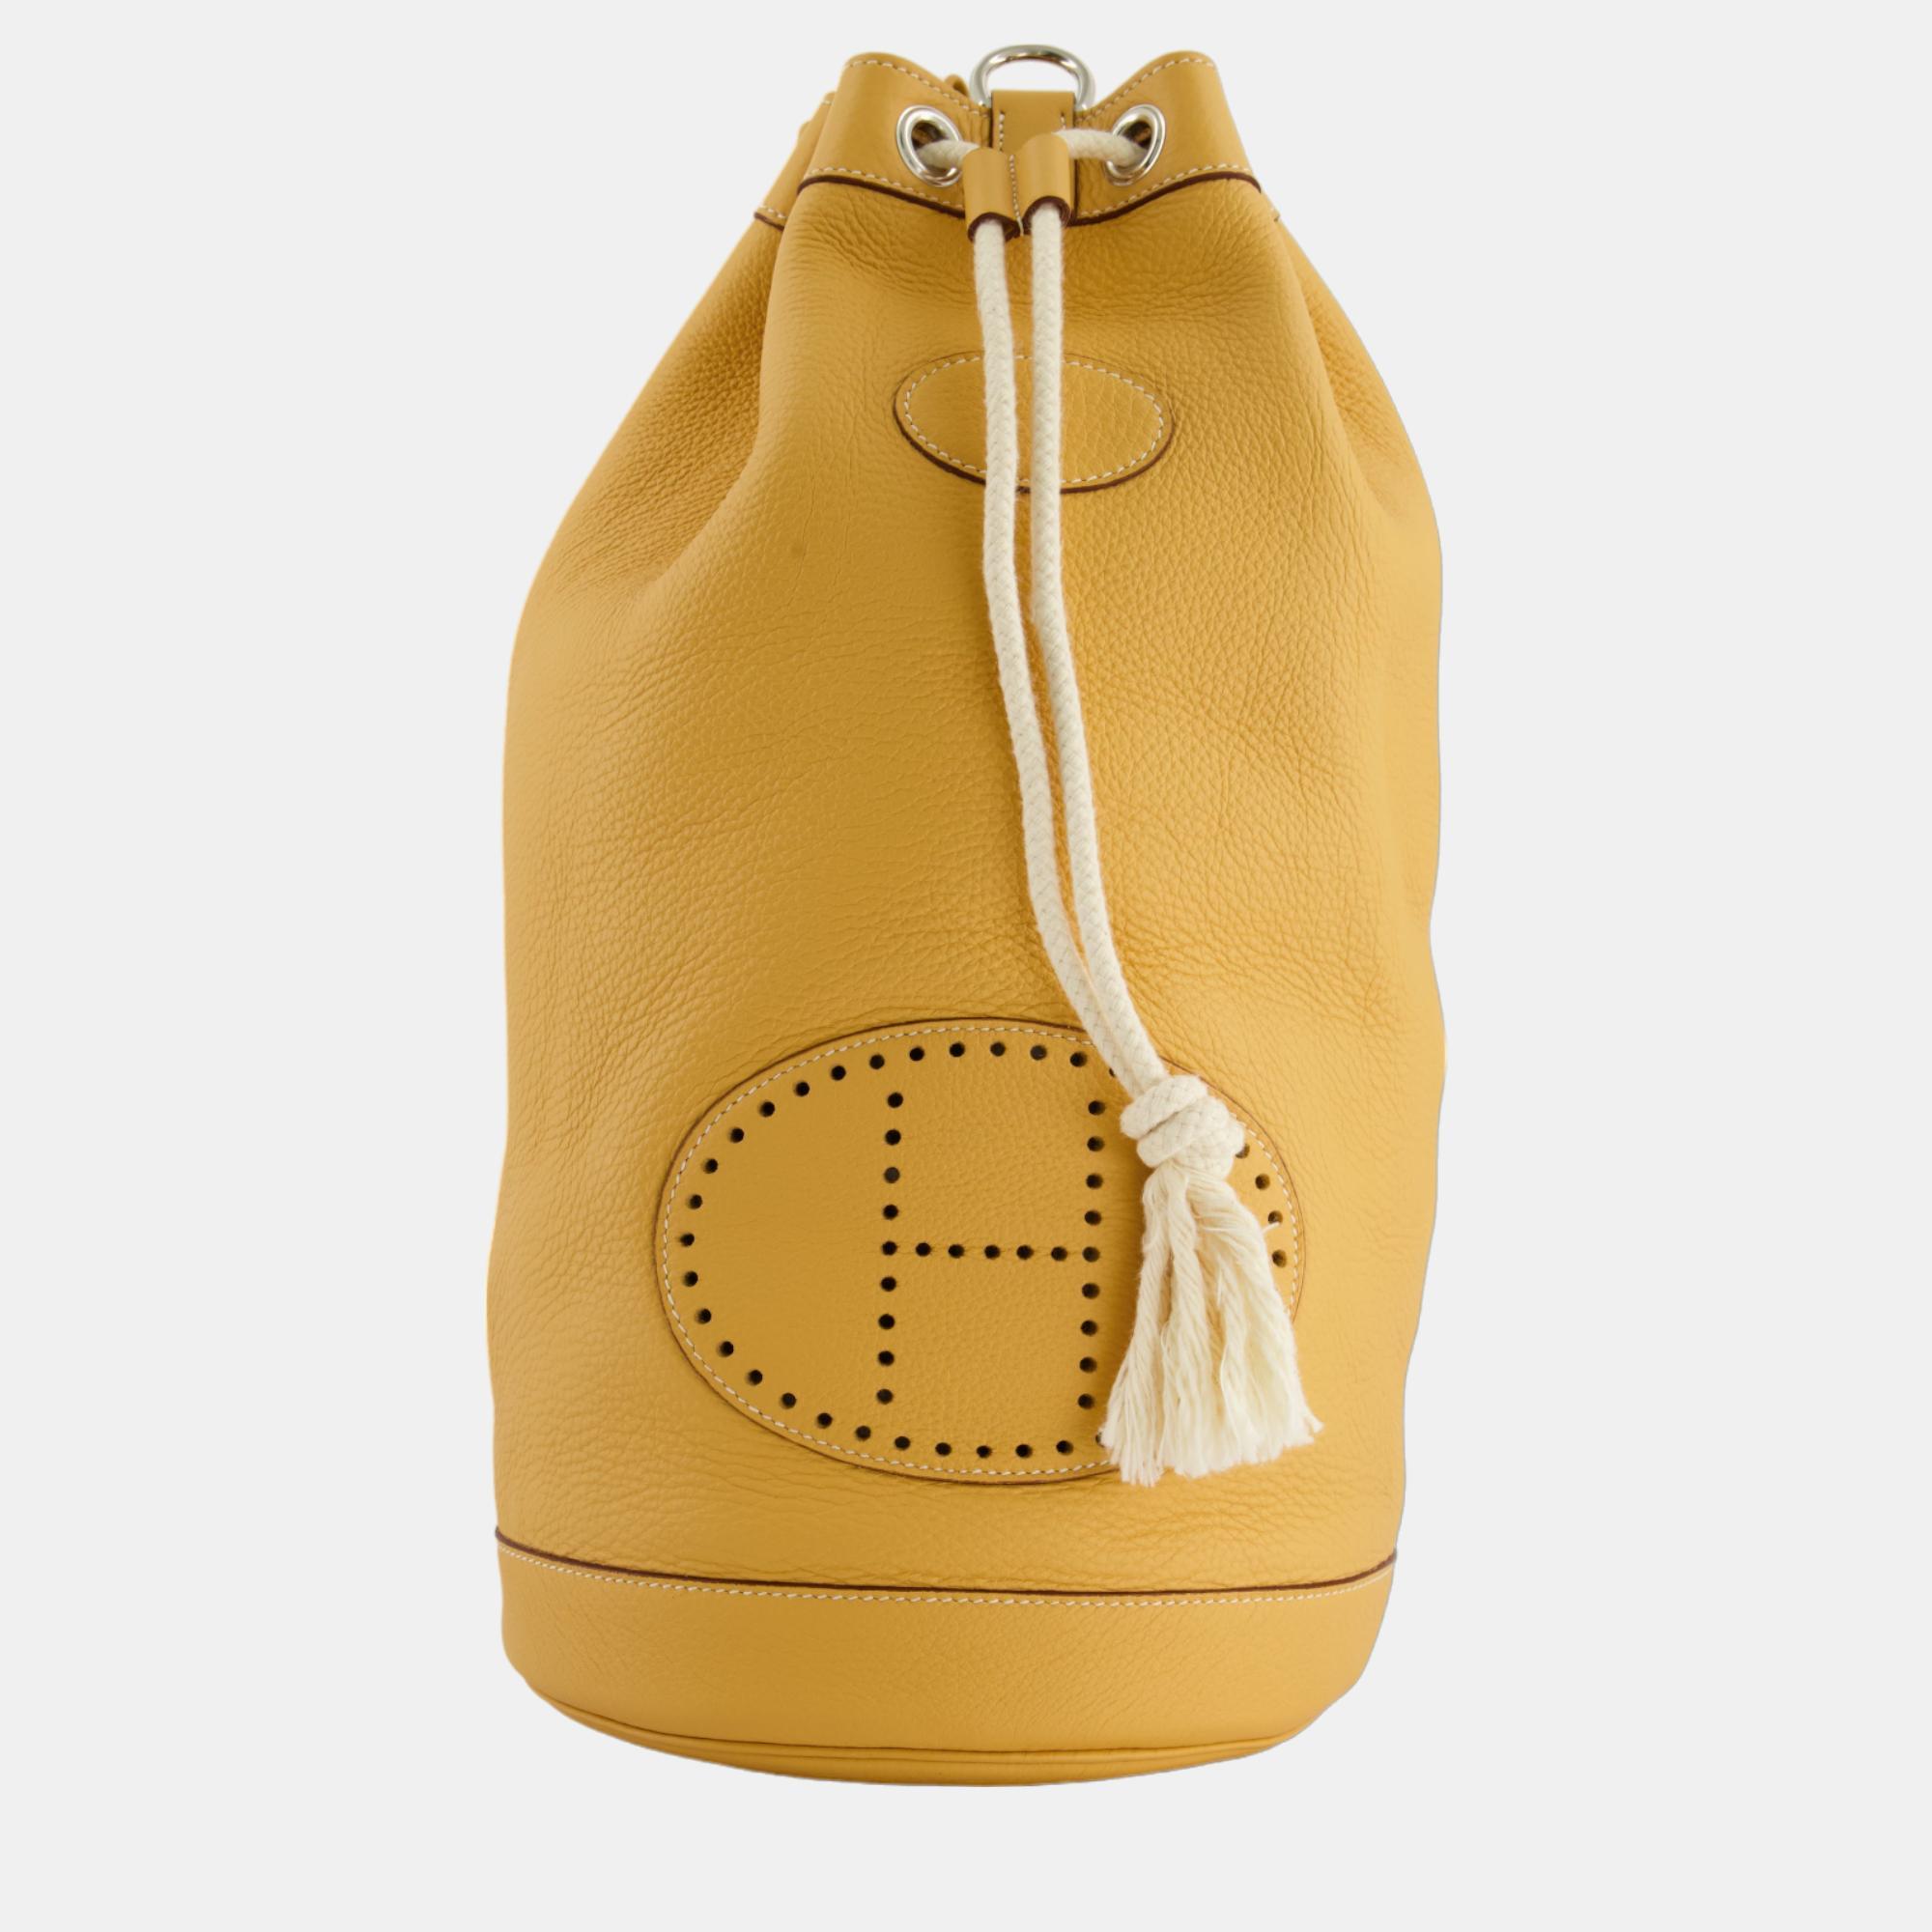 Hermes Lunch Drawstring Shoulder Bag In Jaune Clemence Leather With Palladium Hardware